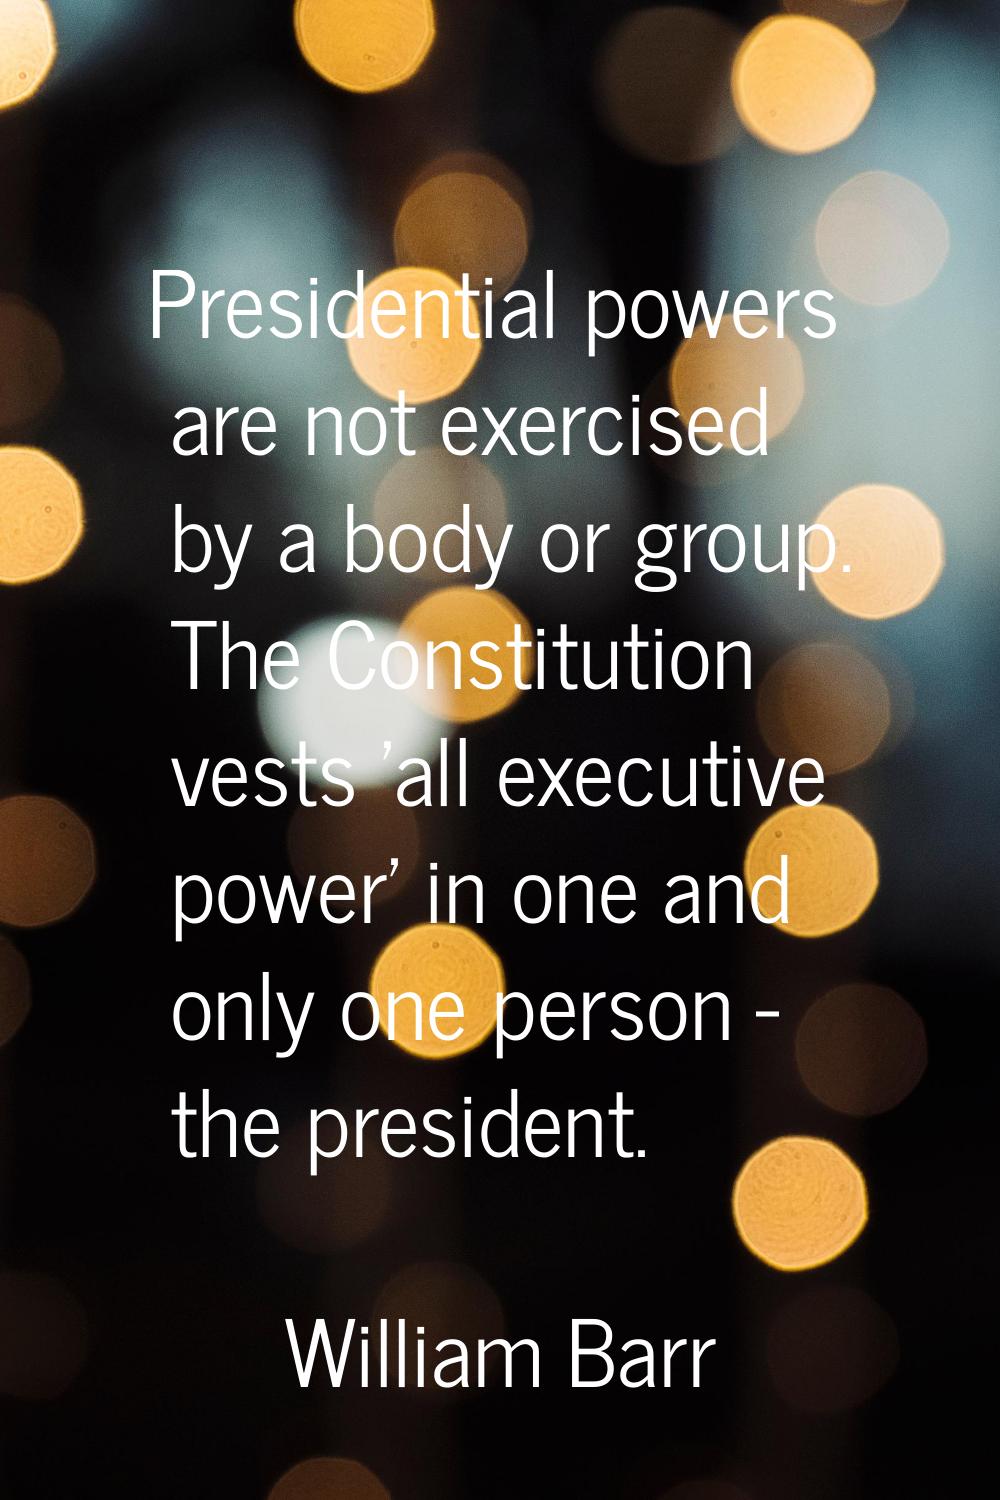 Presidential powers are not exercised by a body or group. The Constitution vests 'all executive pow